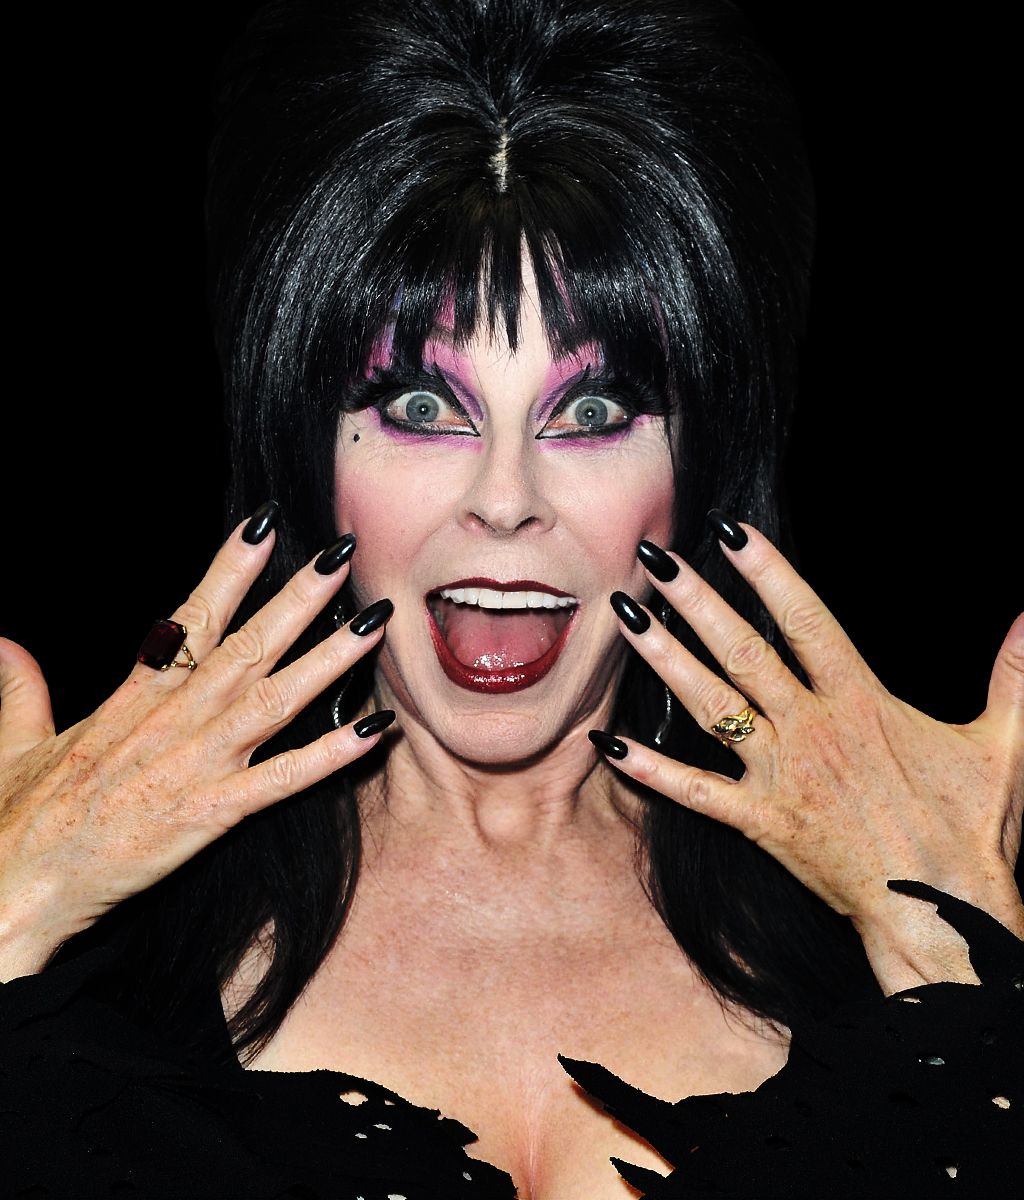 ben rumney recommends show me pictures of elvira pic